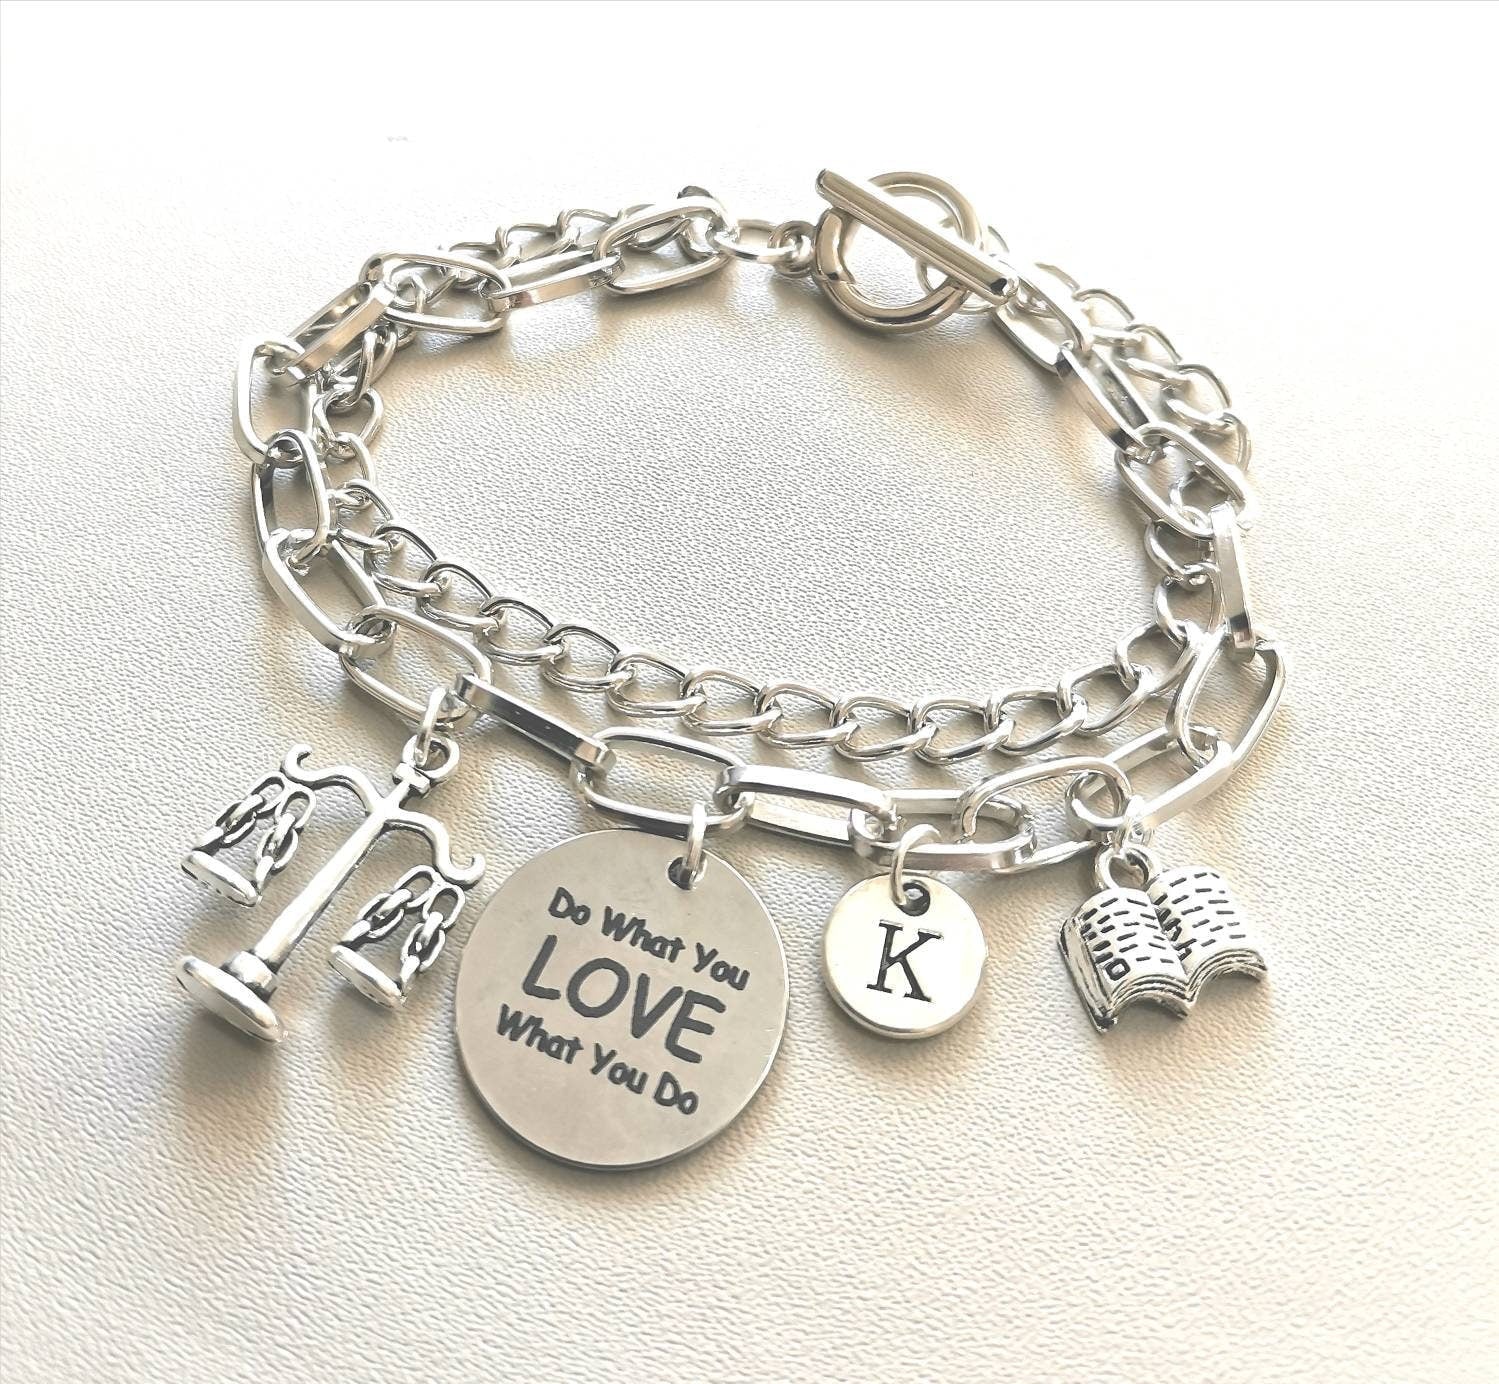 Lawyer Gift, Lawyer Bracelet, Lawyer Graduation Gift, Law Student Gift, Justice, Scales of Justice , Law Graduate Gift, Libra, Lawyer Gift